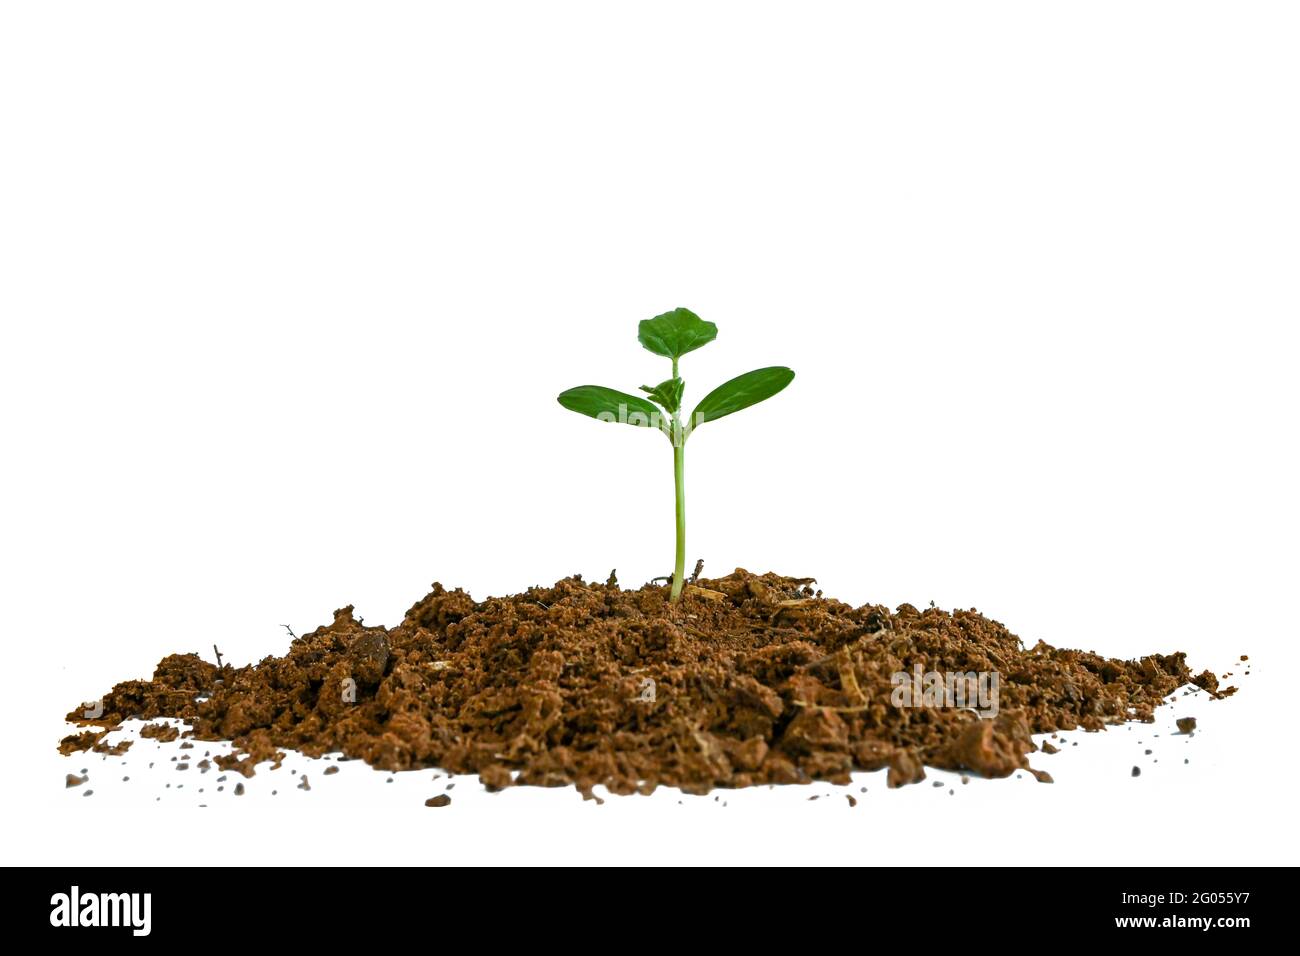 A seedling with green leaves sprouting from separate soil on a white background. Stock Photo